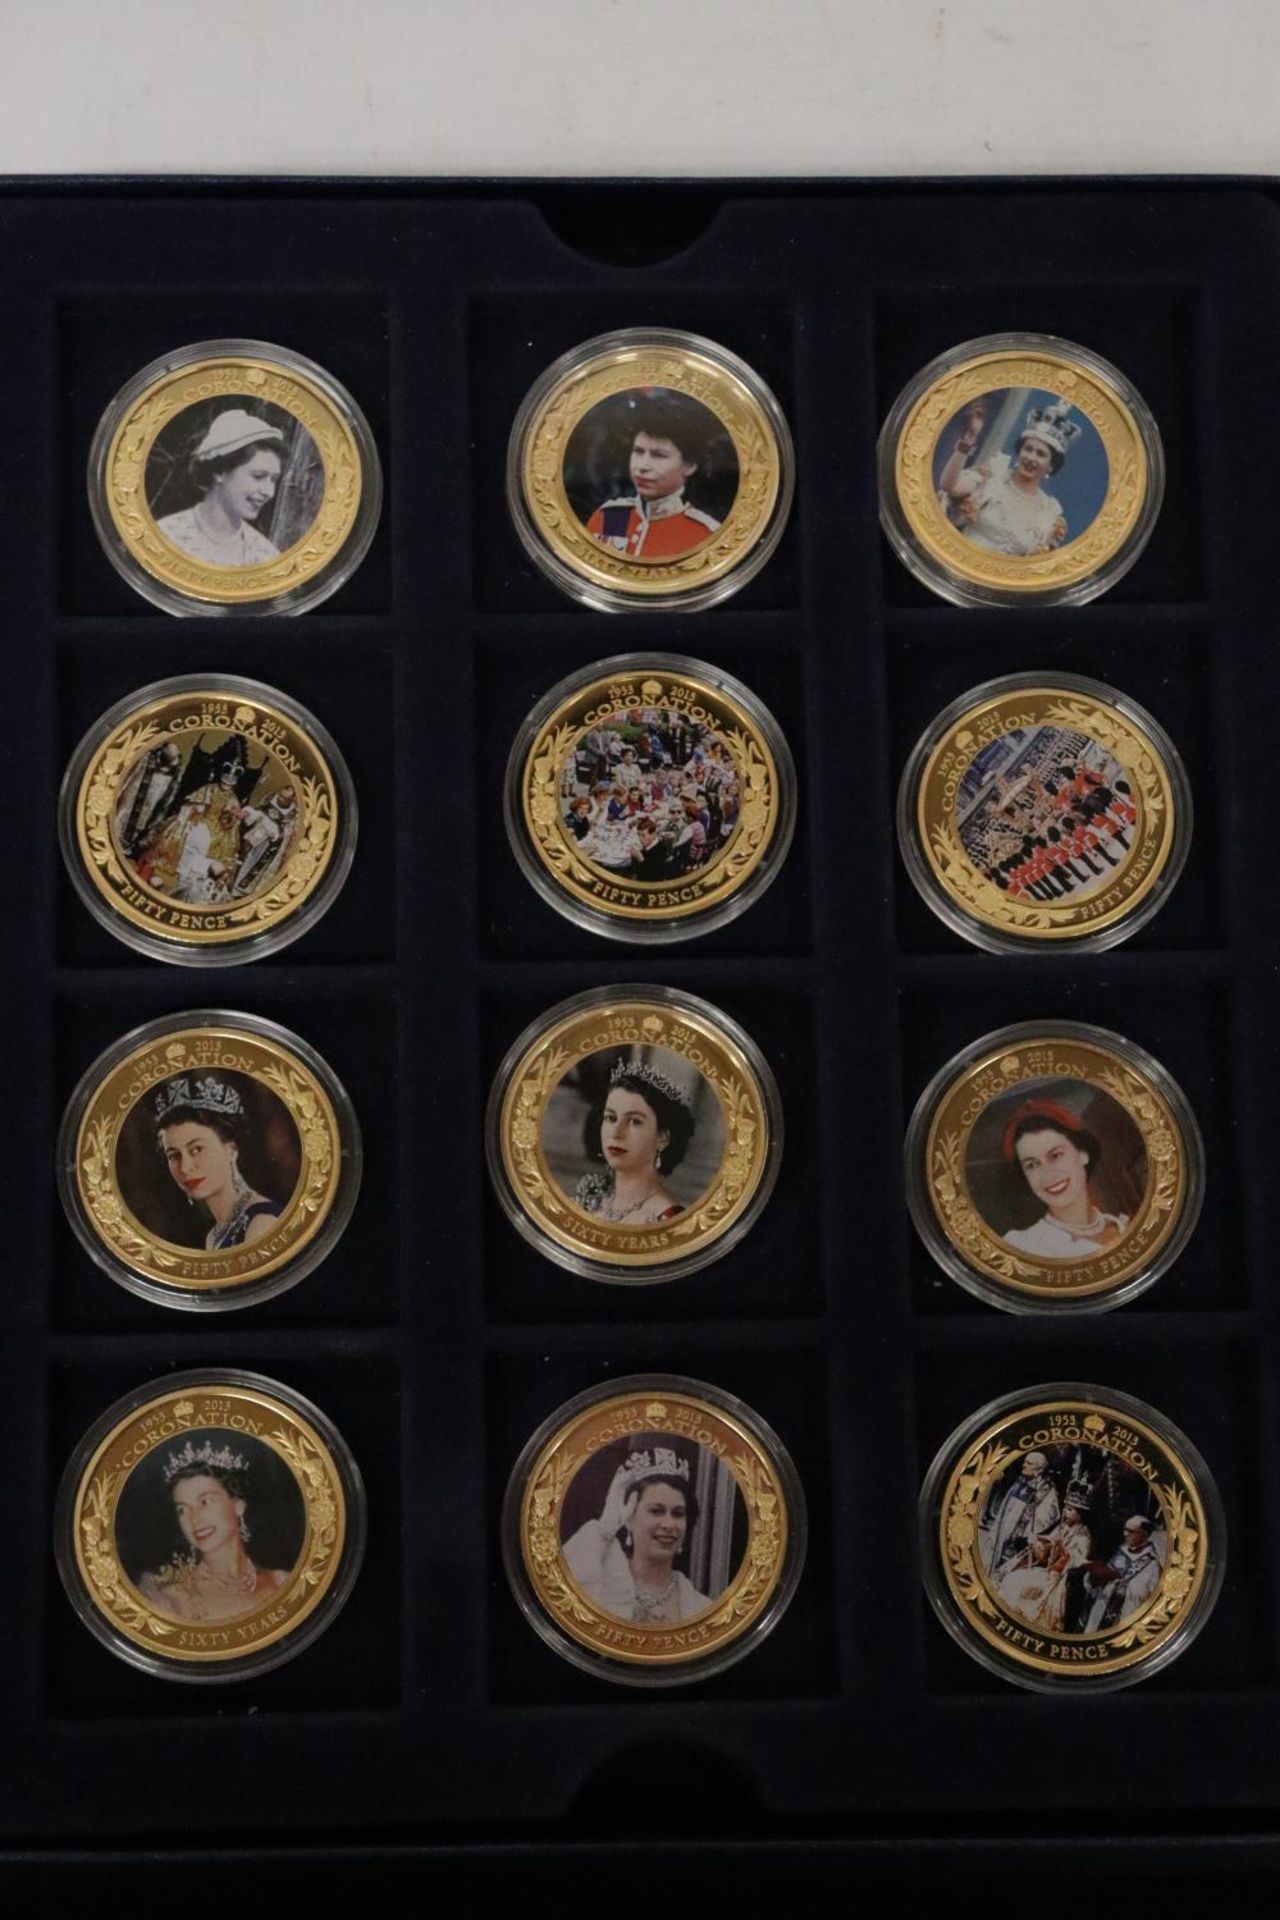 1953-2013 CORONATION JUBILEE OF HM QUEEN ELIZABETH 11, A SELECTION OF 16, 24 CARAT GOLD PLATED COINS - Bild 2 aus 5